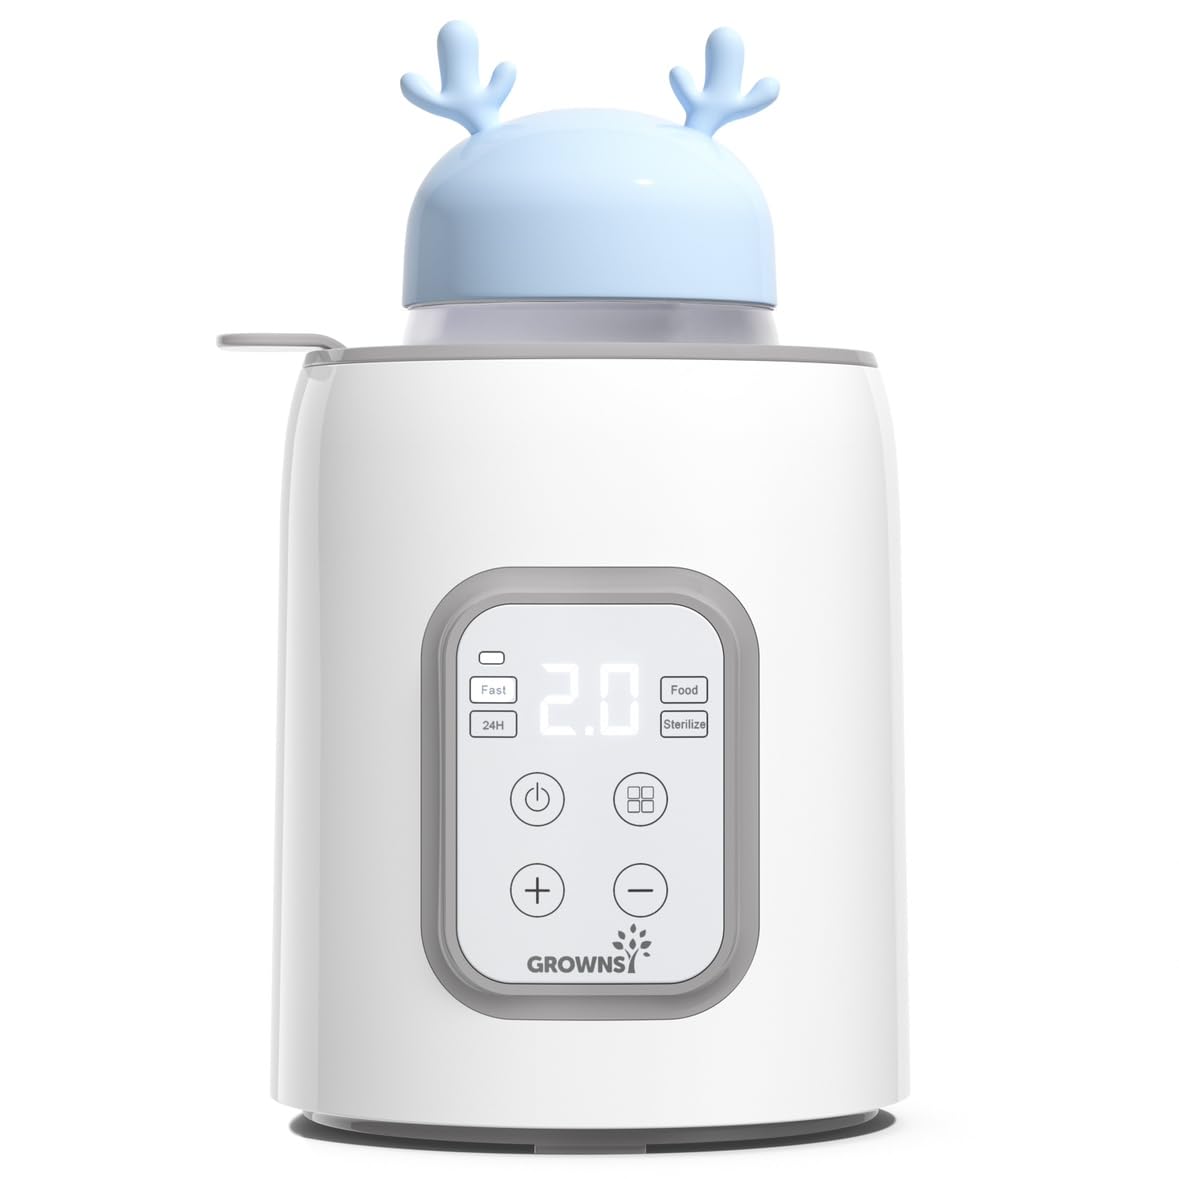 GROWNSY 8-in-1 Fast Baby Milk Warmer with Timer Gray - $27.99 - Free shipping for Prime members -Woot!